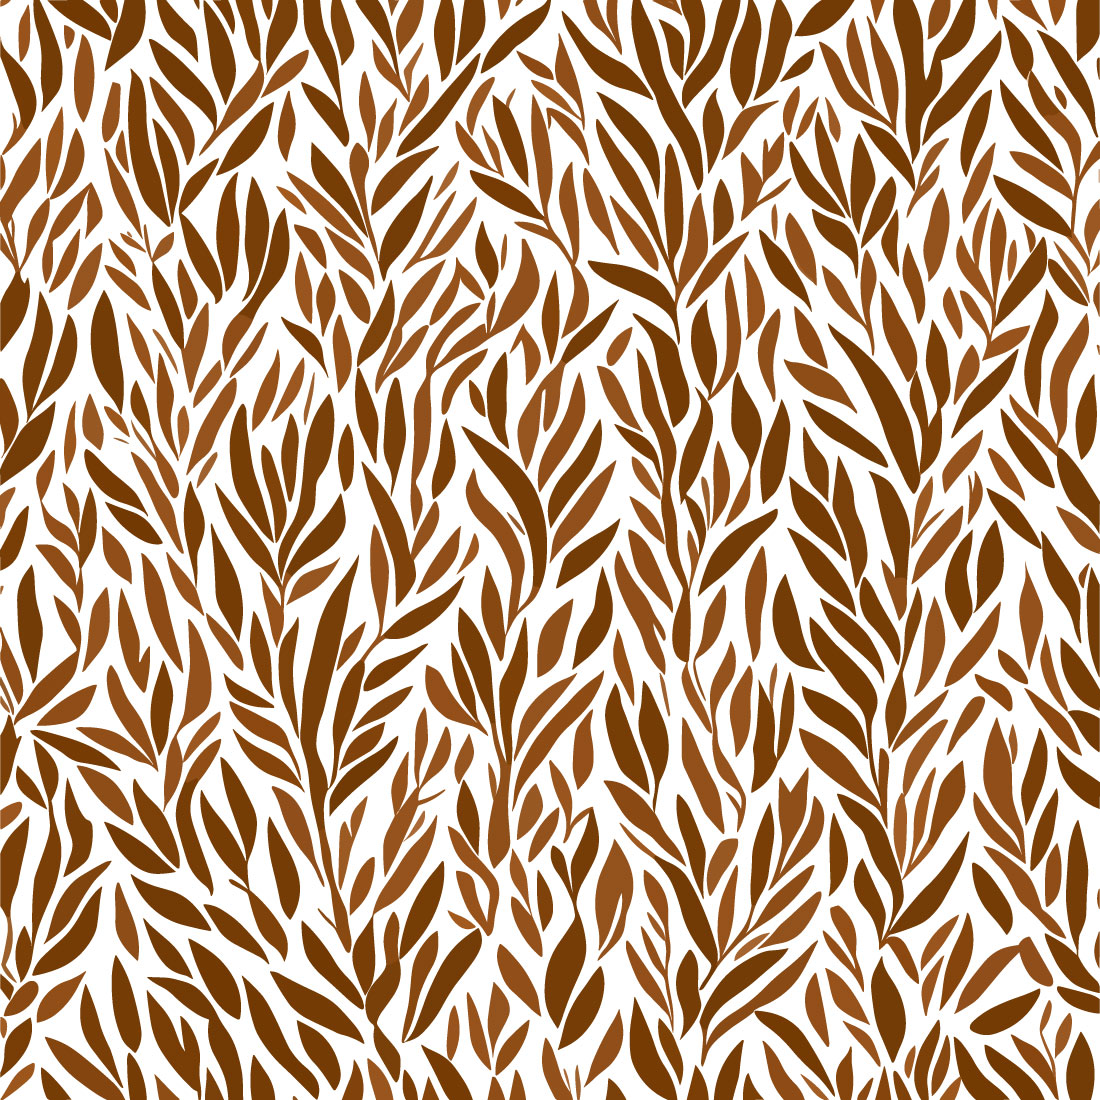 Seamless patterns with leaves on white background Vector illustration preview image.